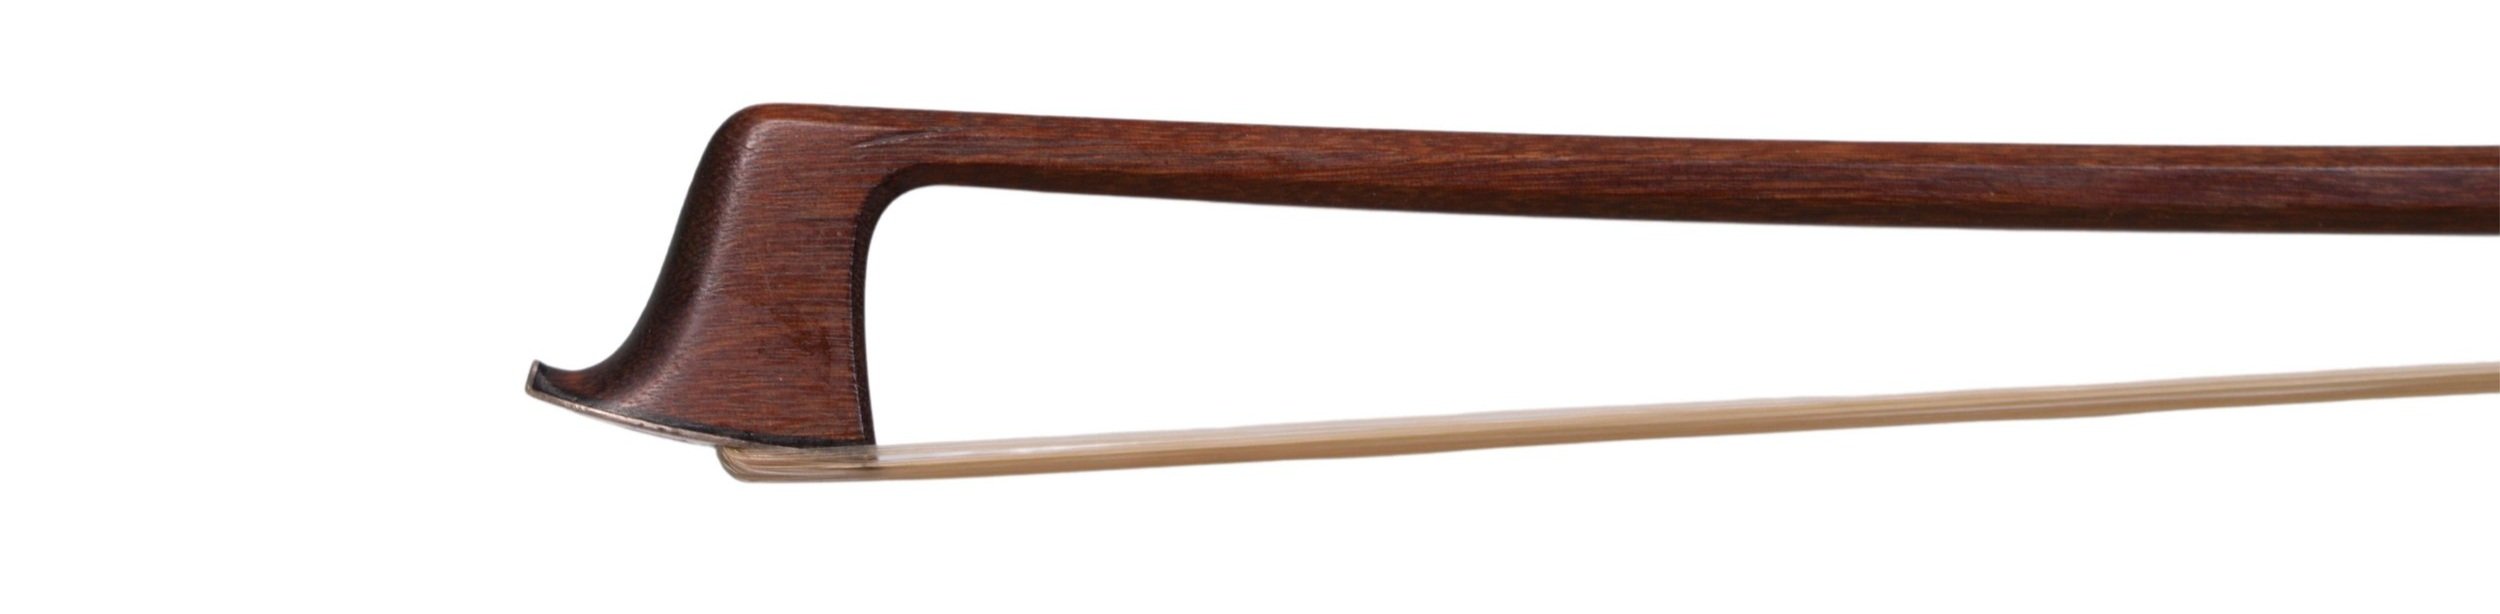 Violin bow by W.E. Hill and Sons, London